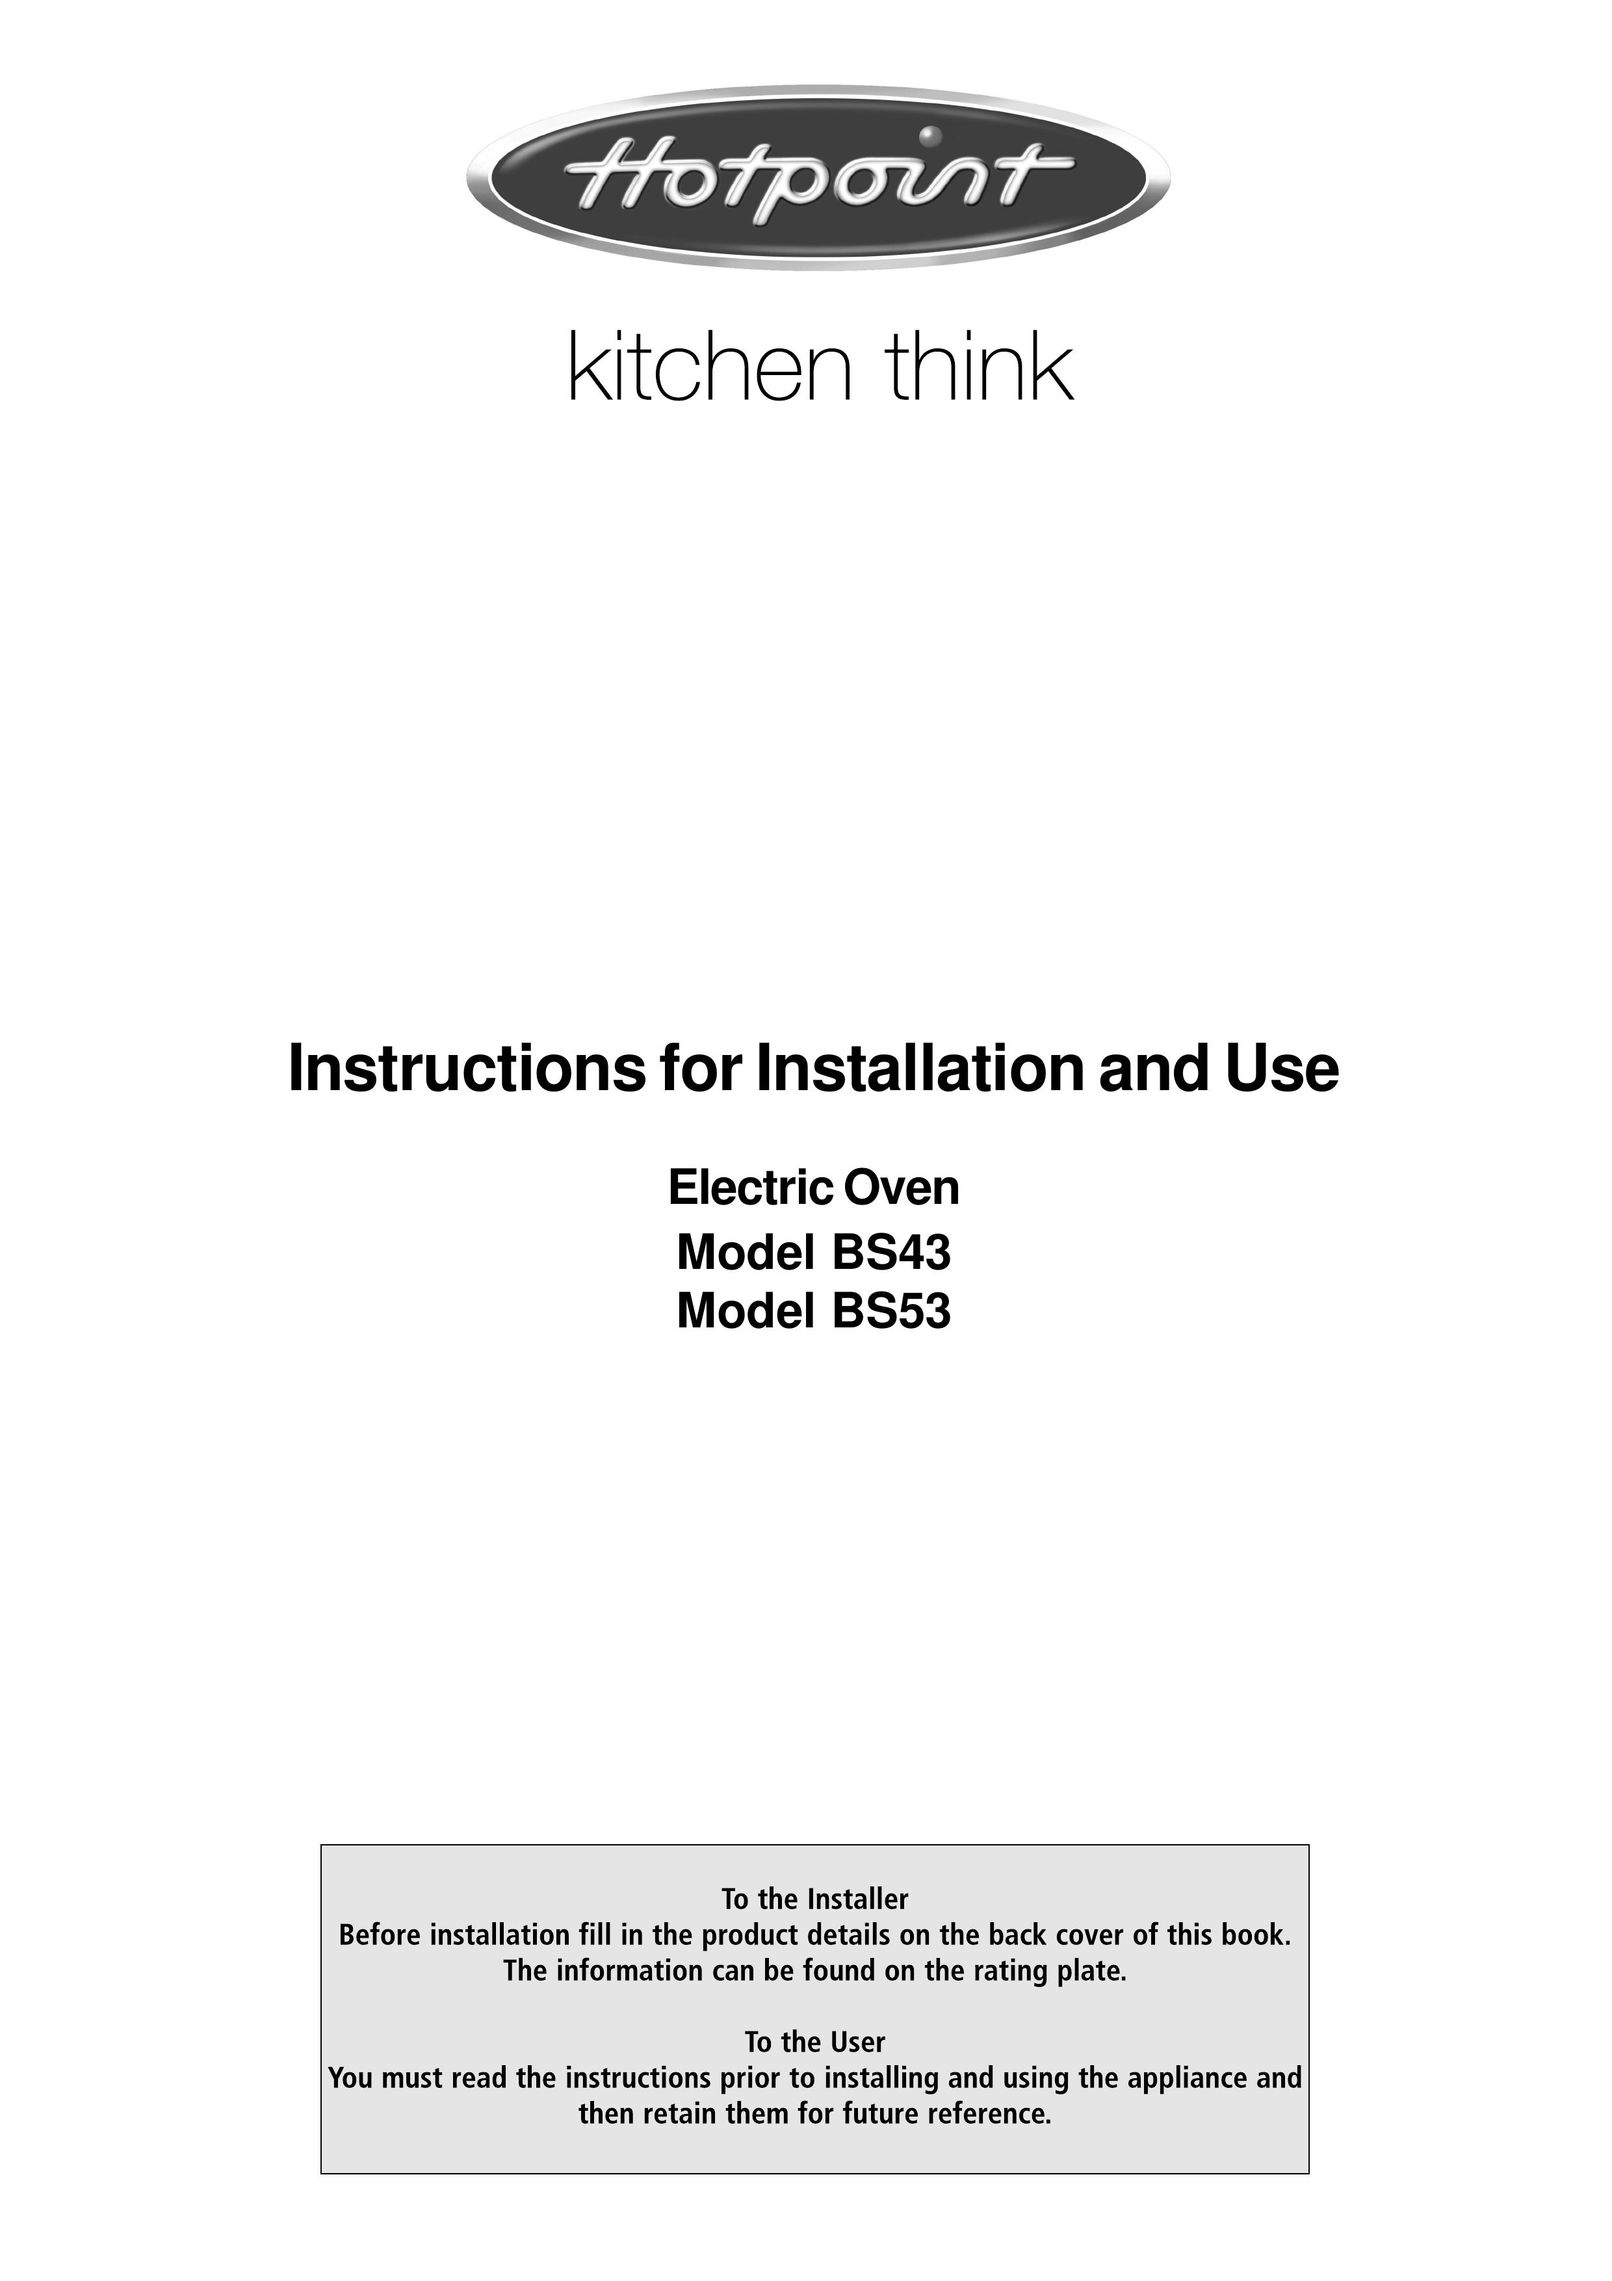 Hotpoint BS53 Oven User Manual